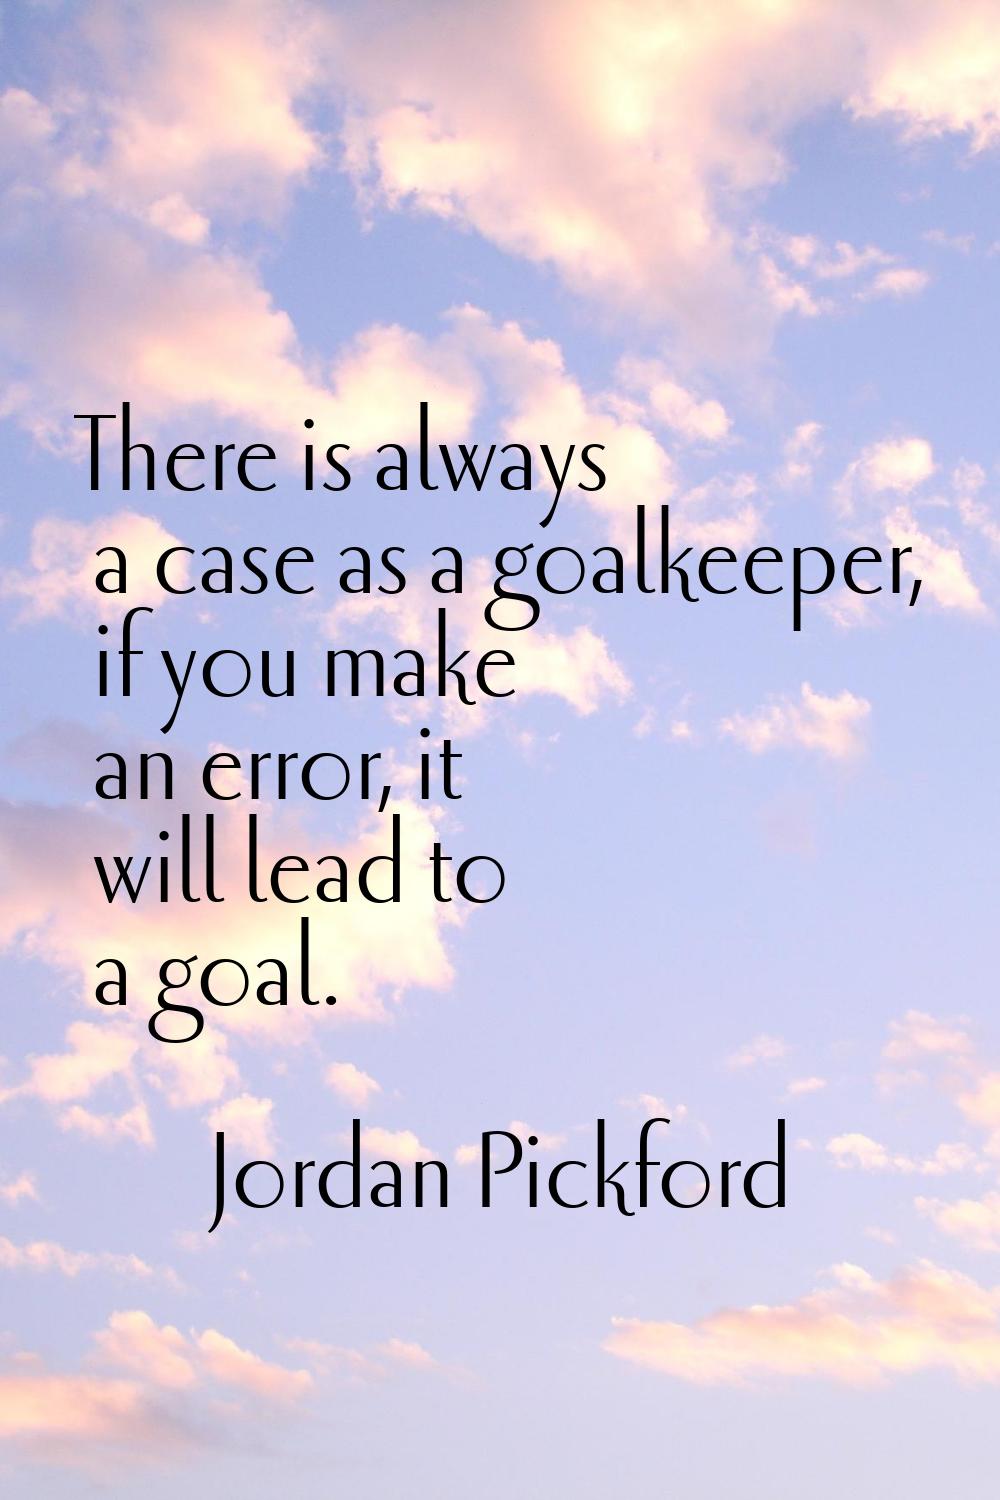 There is always a case as a goalkeeper, if you make an error, it will lead to a goal.